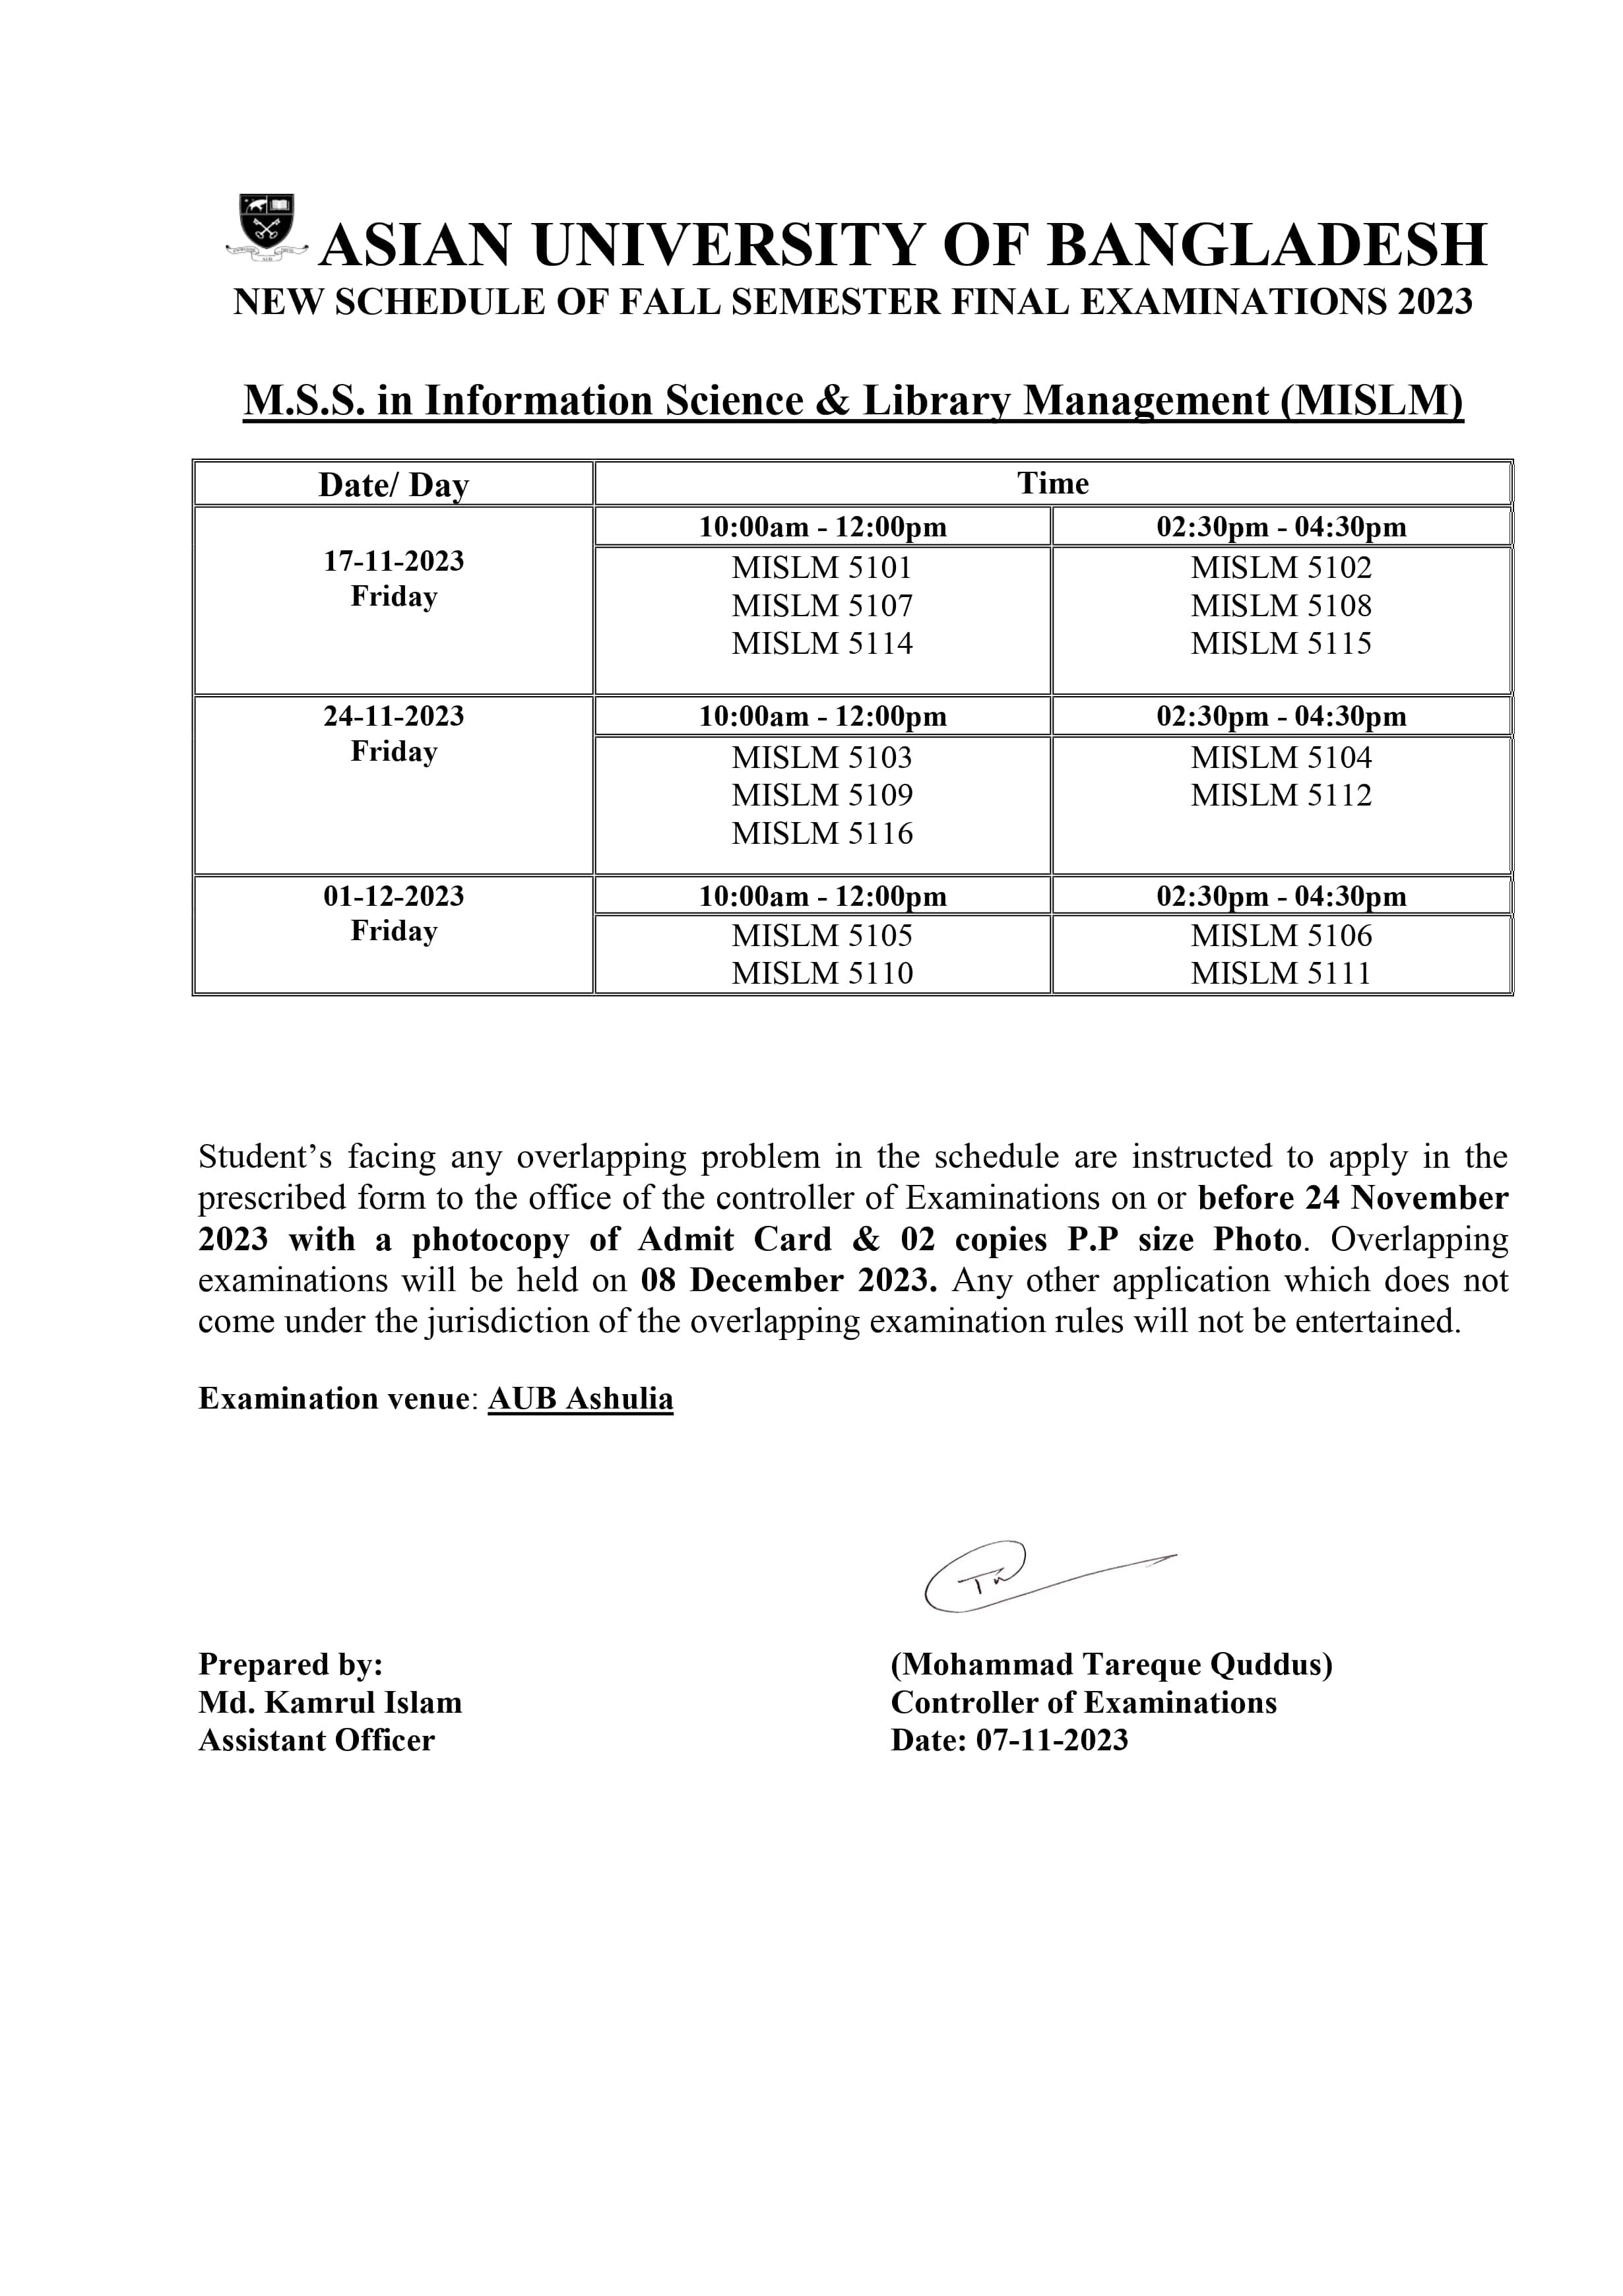 Fall 2023 Semester Final Exam Routine - Department of Information Science & Library Management